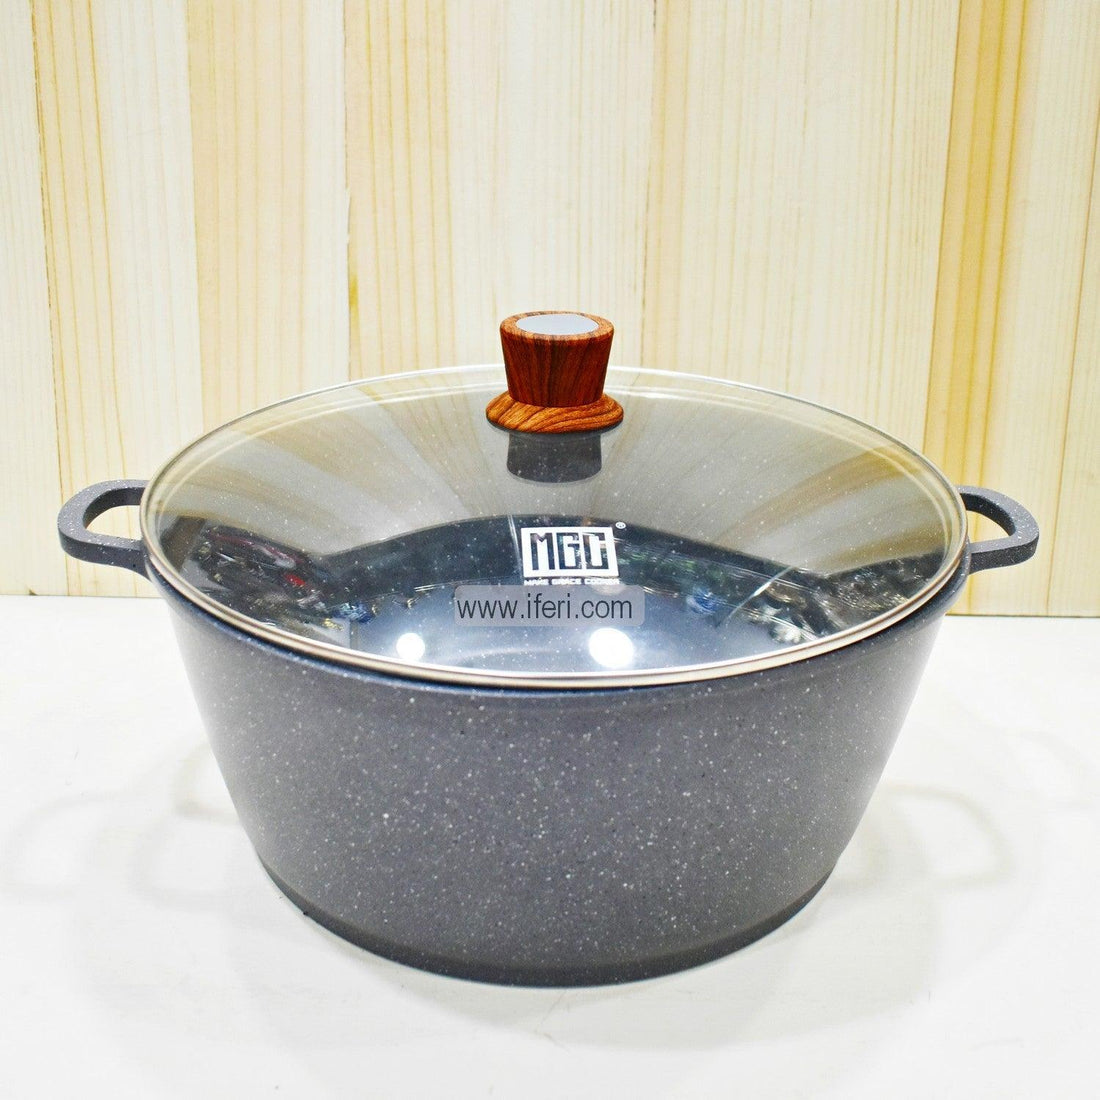 Buy MGC Non-Stick Cookware / Casserole with Lid online from iferi.com in Bangladesh